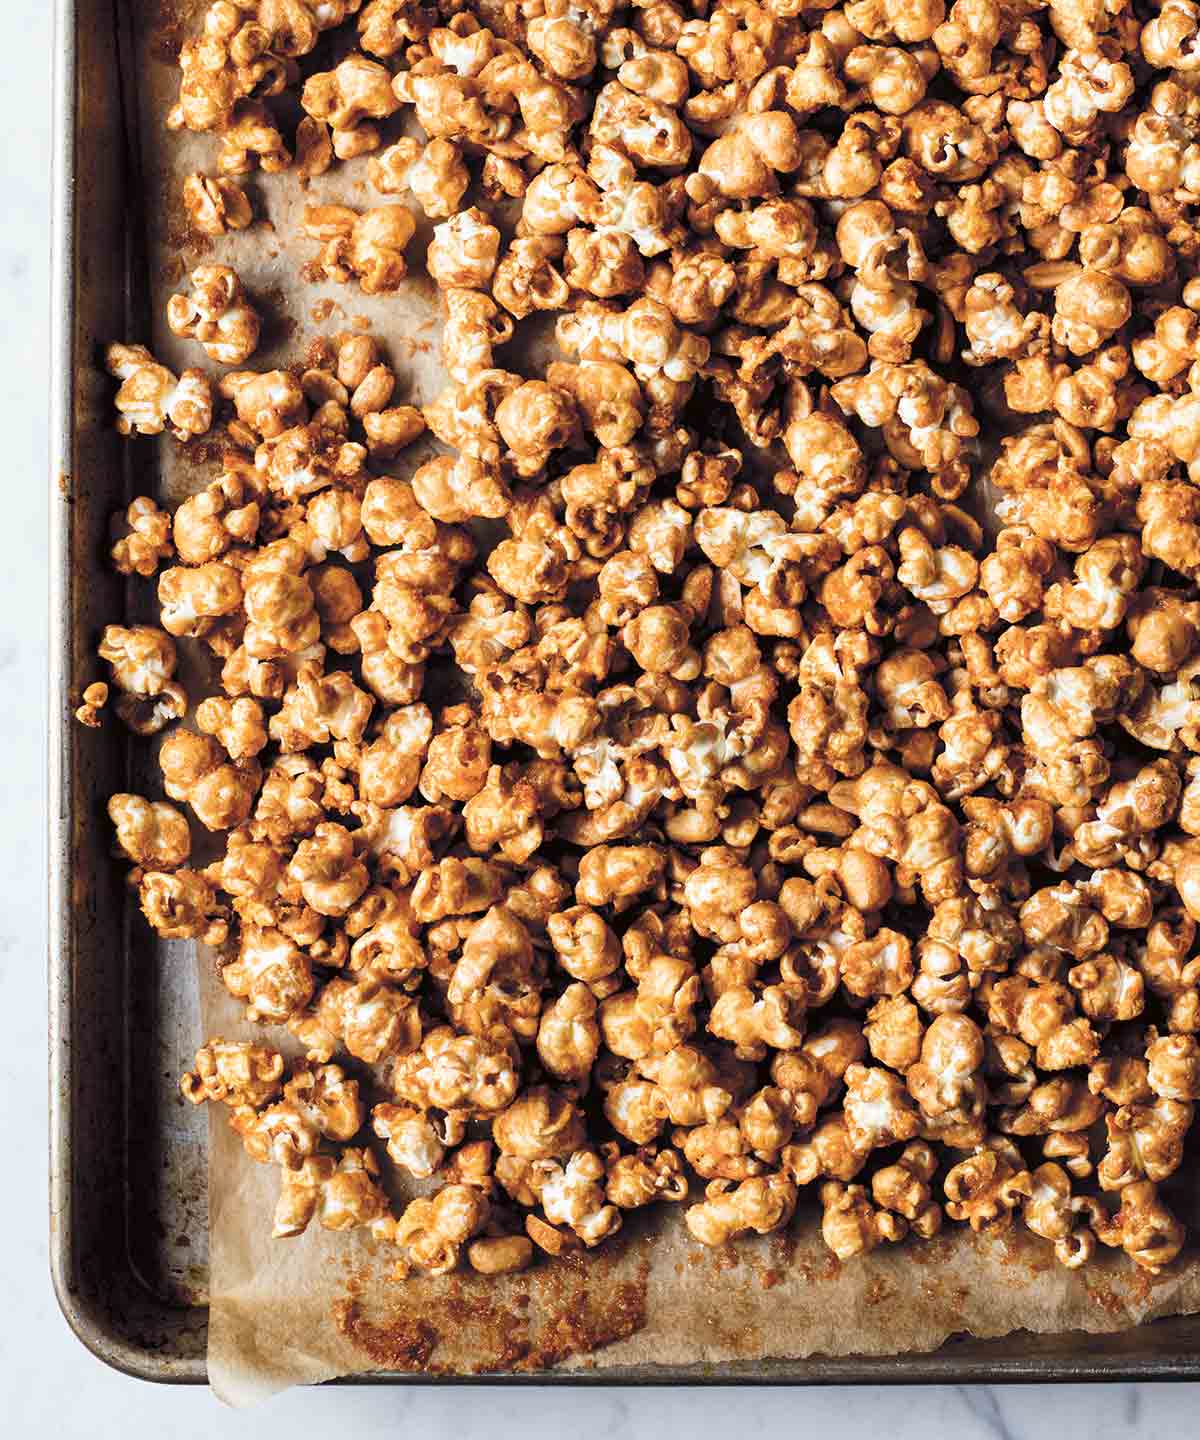 A baking sheet filled with maple caramel corn.